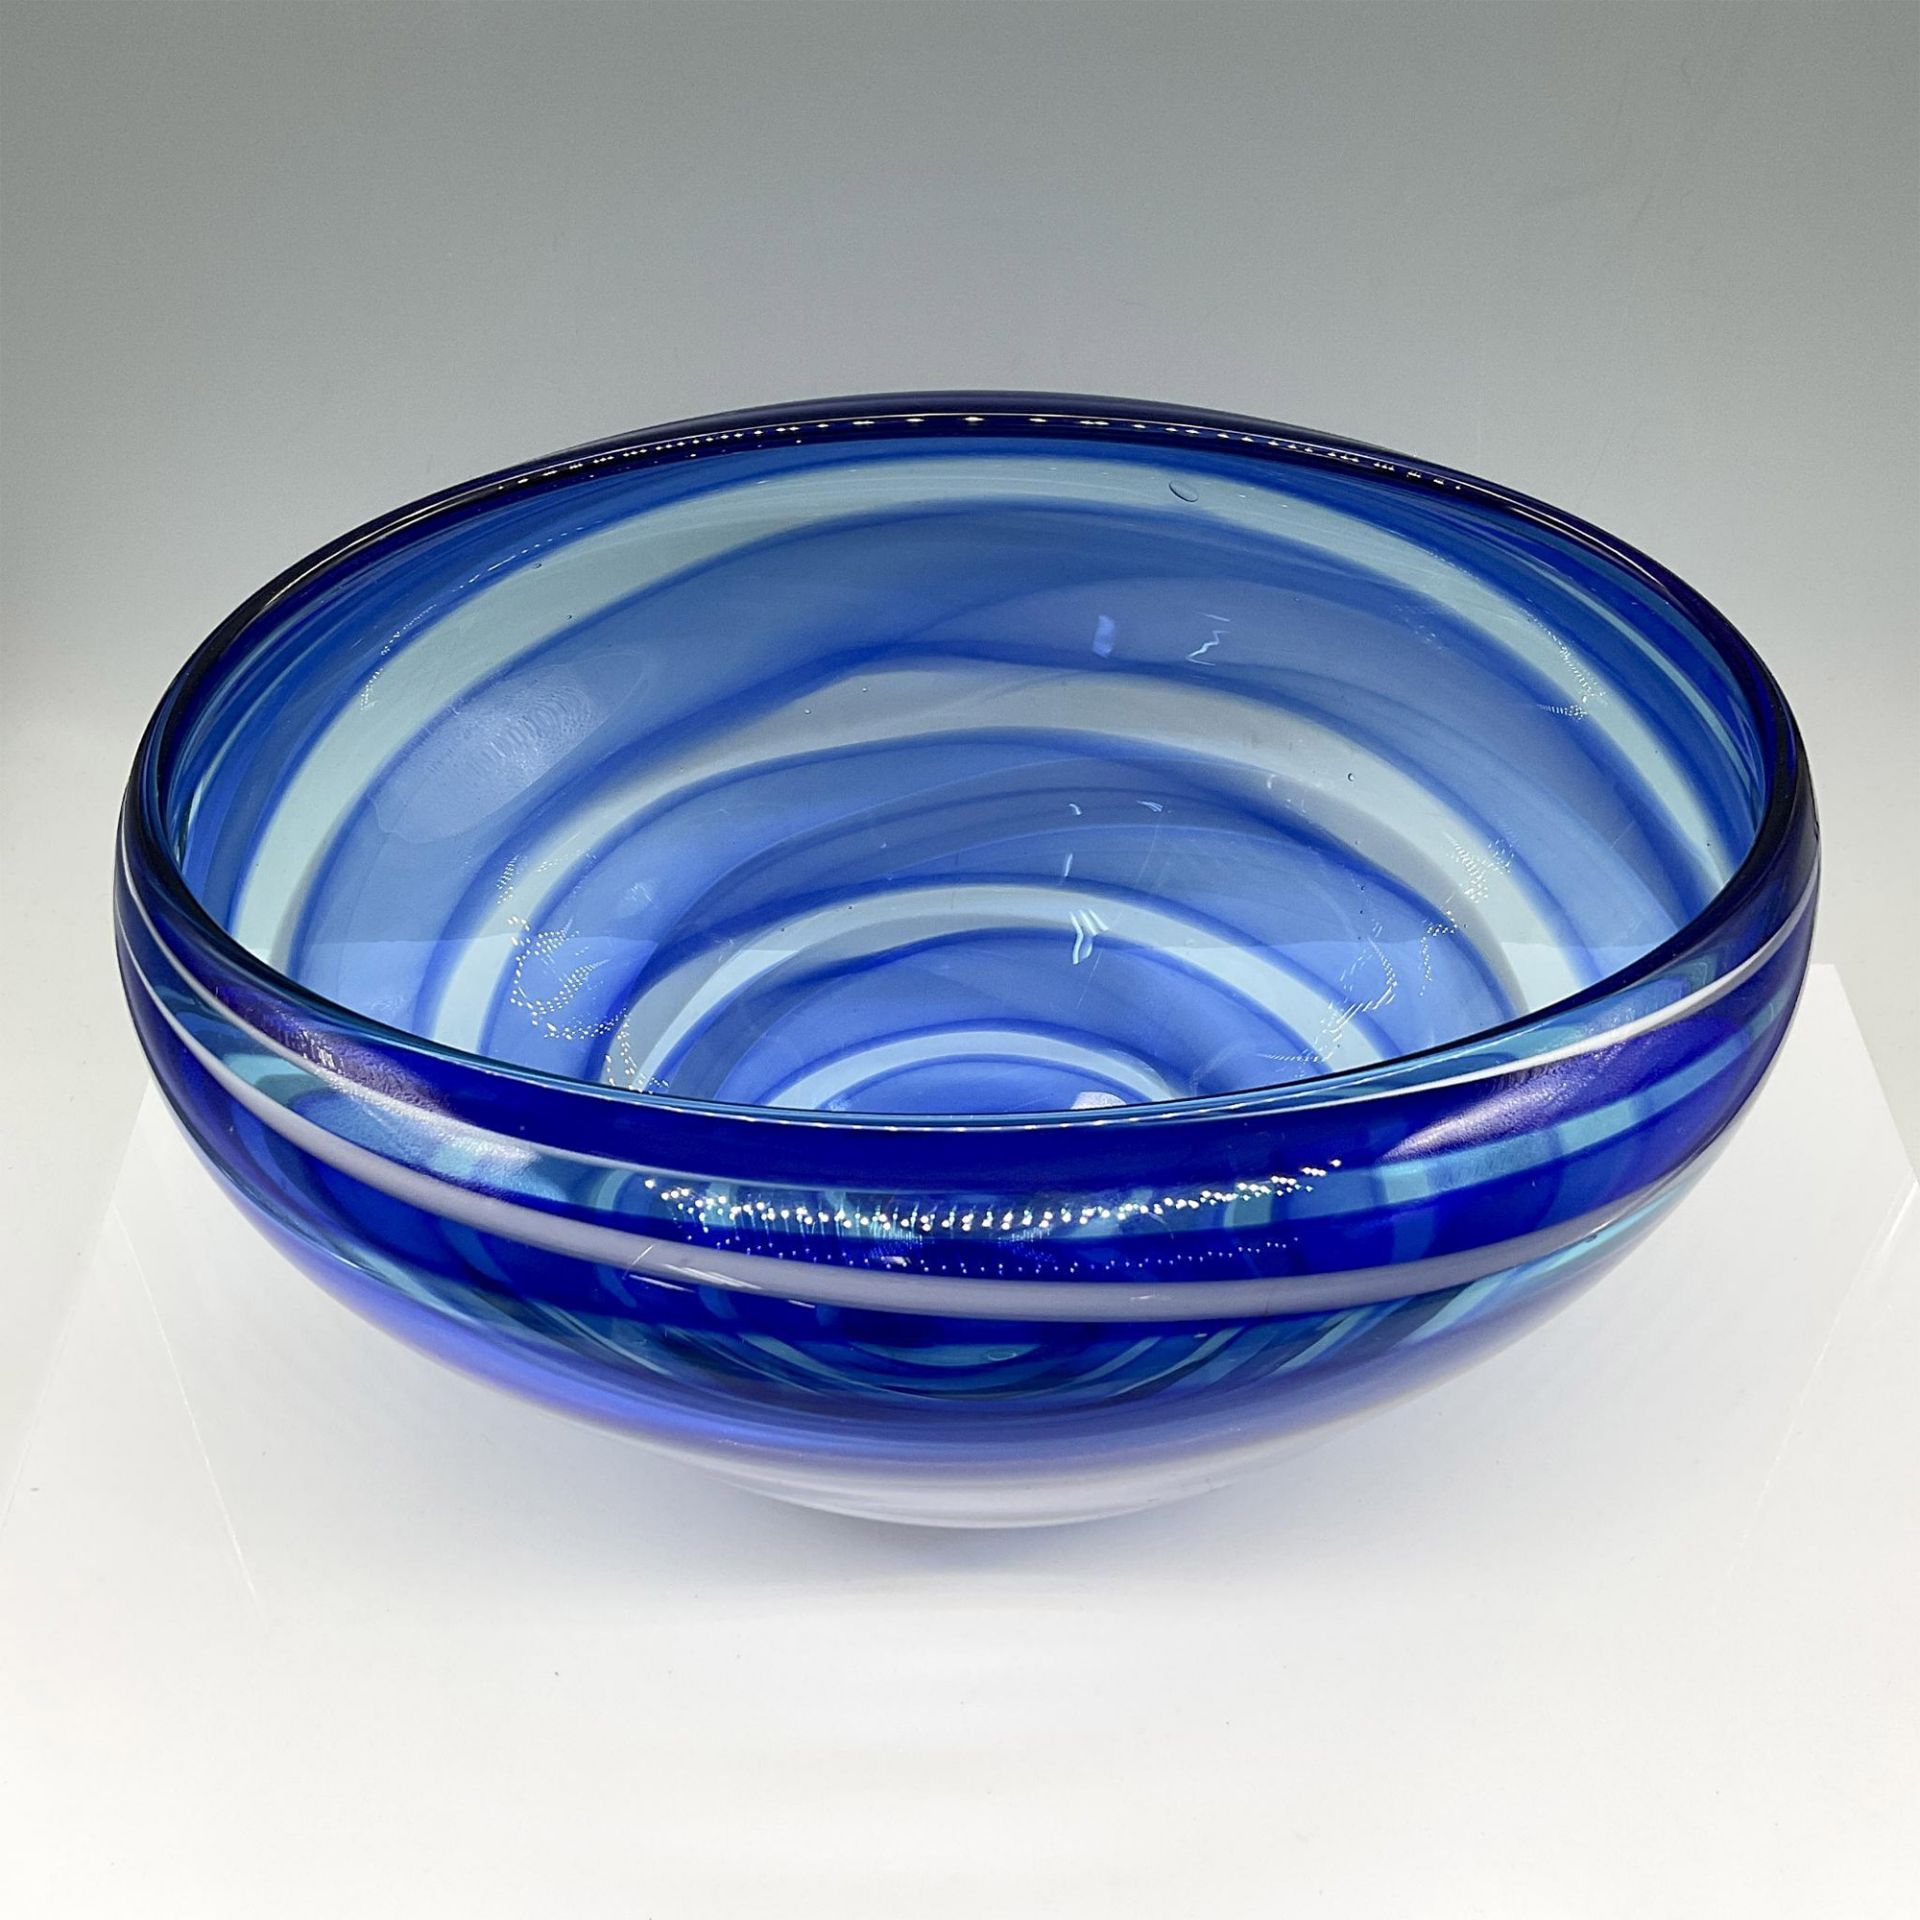 Evolutions by Waterford Crystal Spiral Blue Bowl - Image 2 of 3